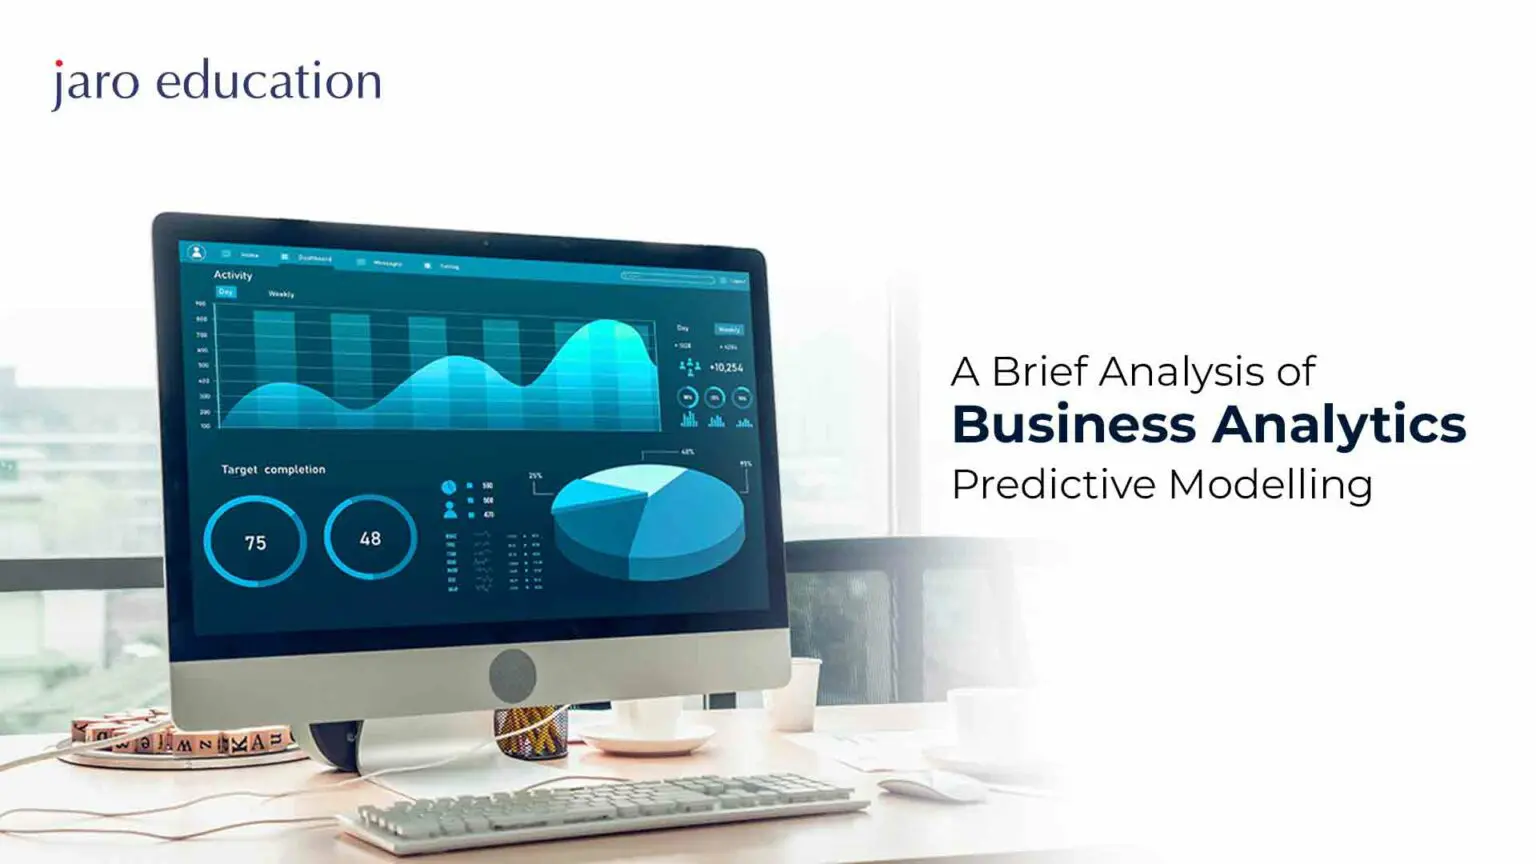 A-Brief-Analysis-of-Business-Analytics-Predictive-Modelling